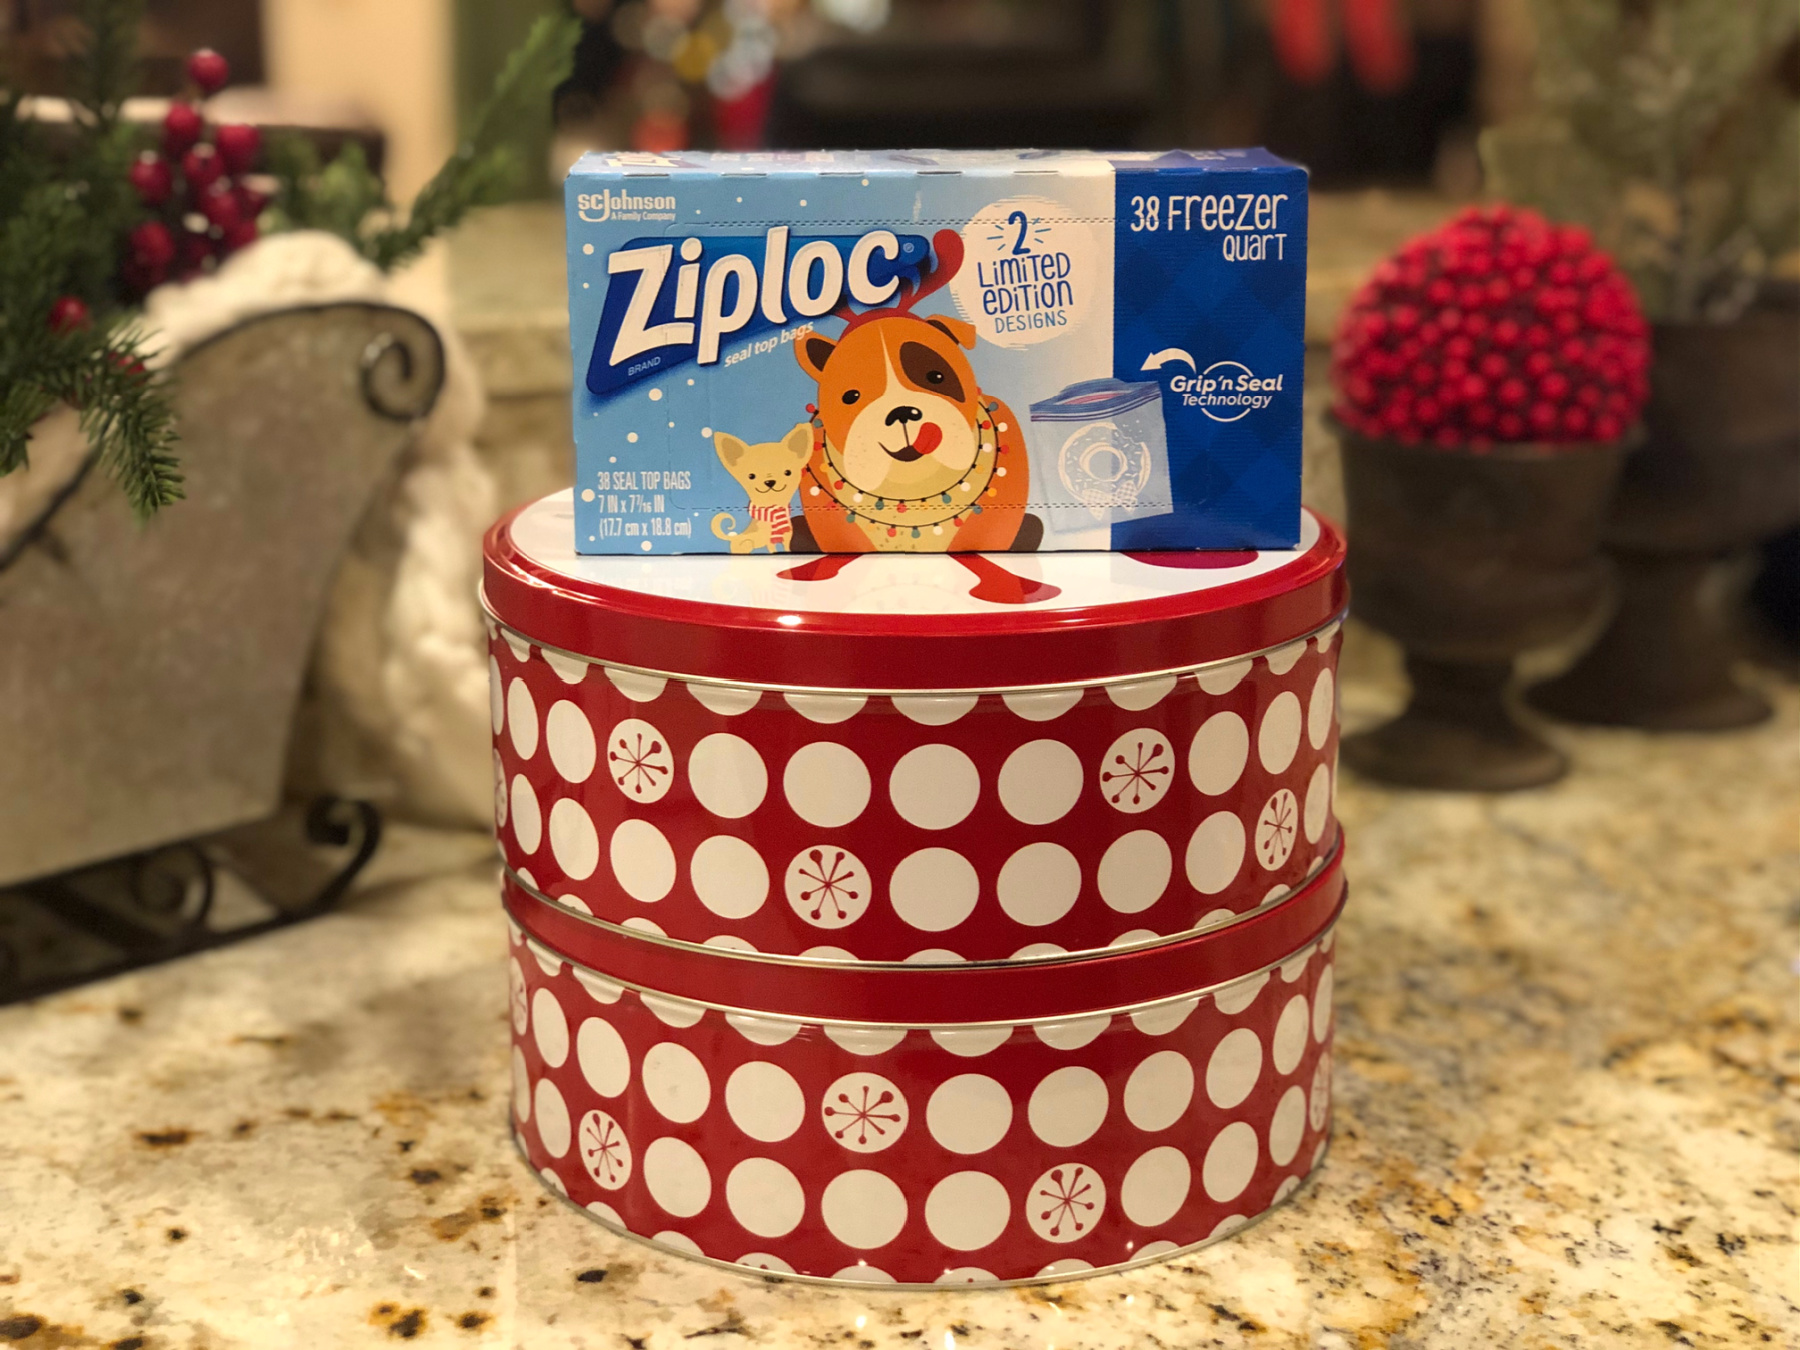 Celebrate The Season With Limited Edition Ziploc® Brand Holiday Bags - Why Not Host A Socially Distanced Cookie Exchange? on I Heart Publix